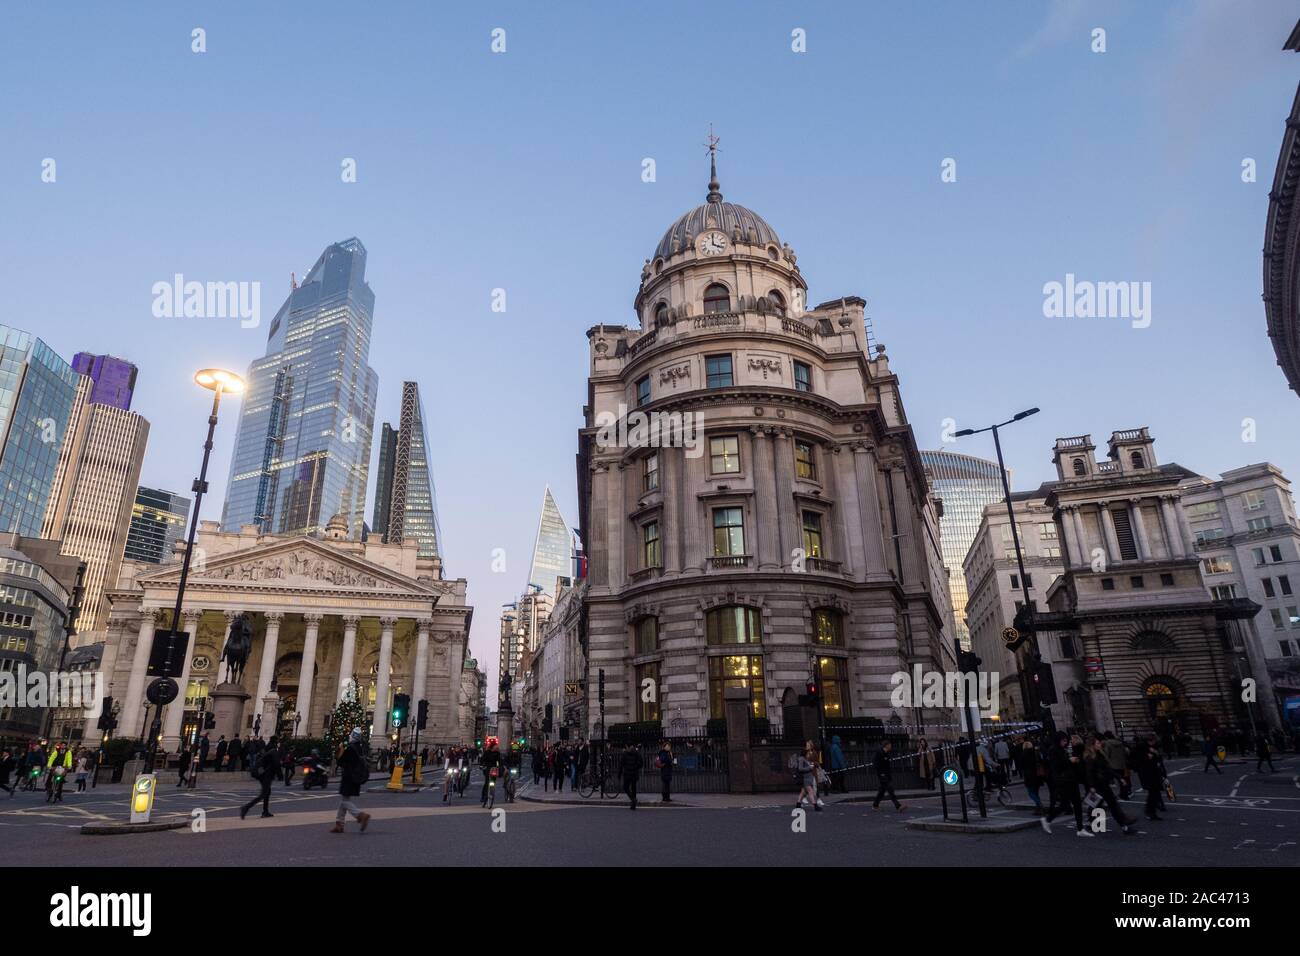 The Royal Exchange (left), now used as a luxury shopping centre, nr Bank of England, London Stock Photo